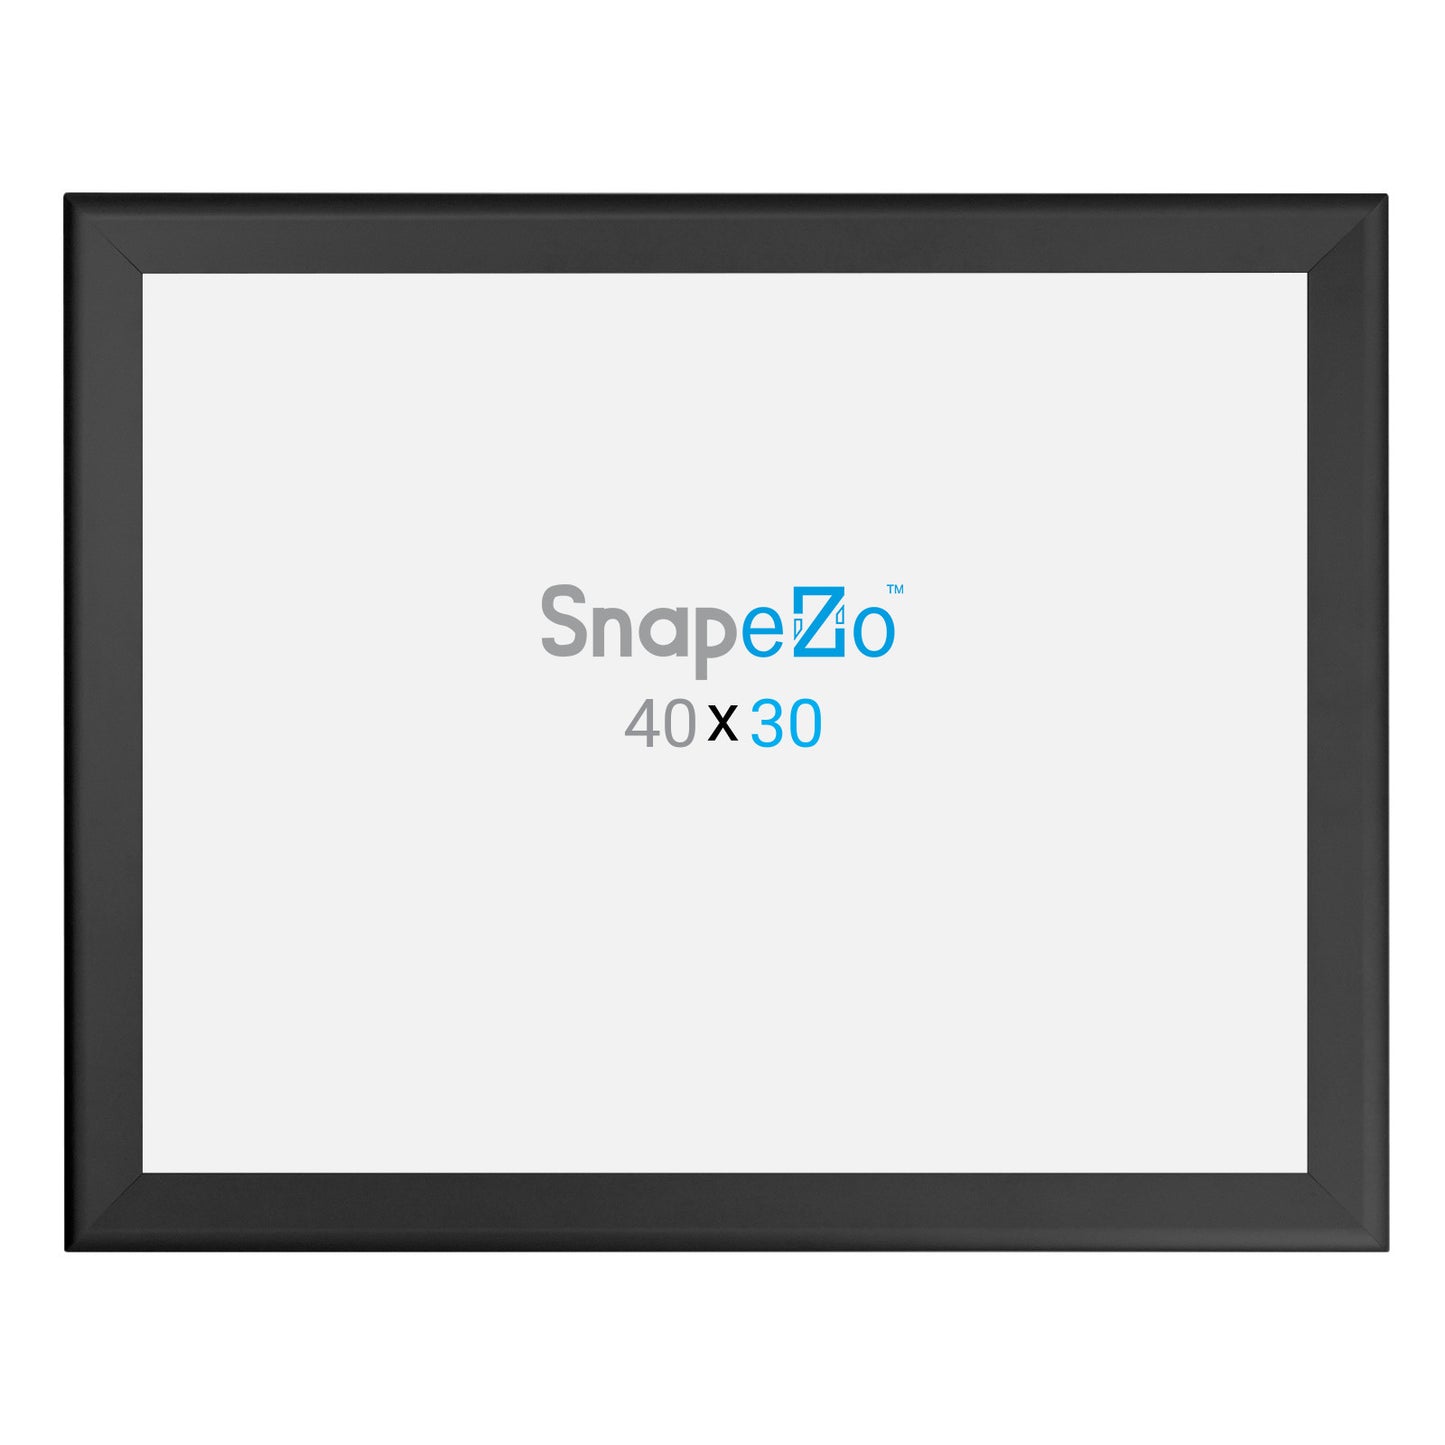 3 Case Pack of Snapezo® of Black 30x40 Movie Poster Frame - 1.7" Profile